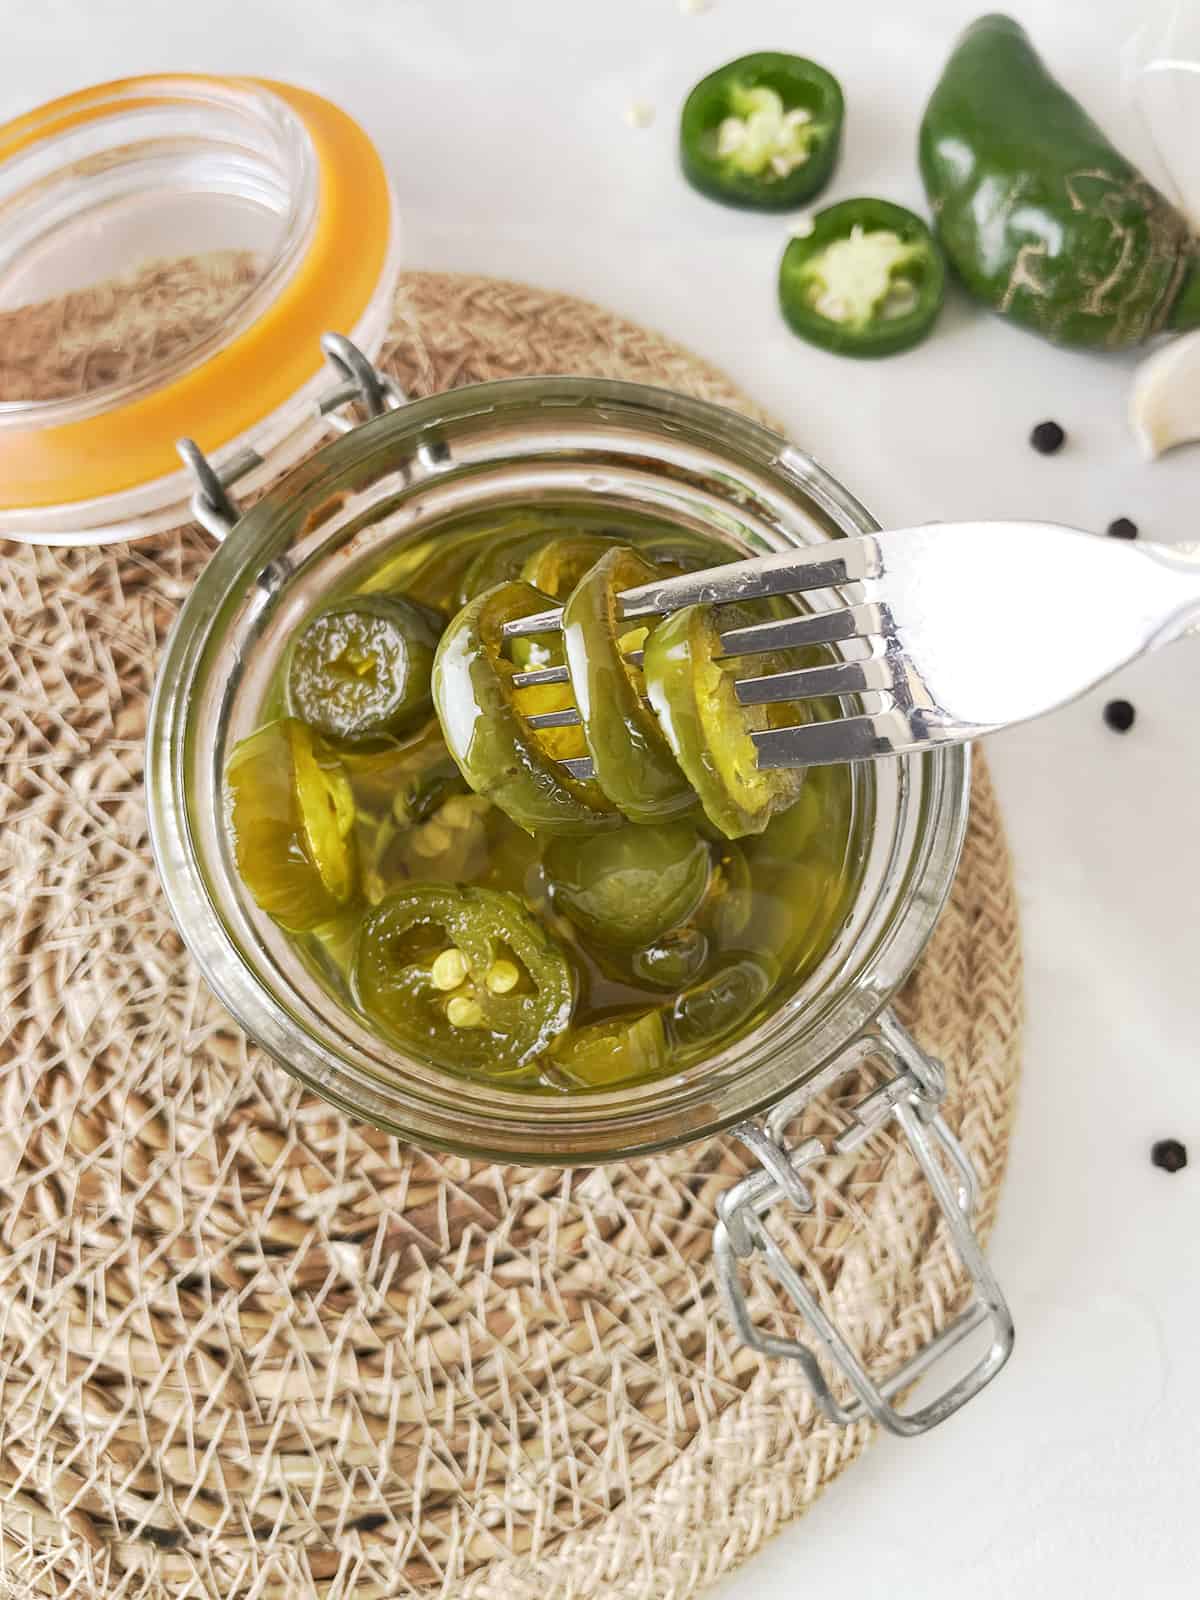 A fork removing pickled jalapenos from a jar.